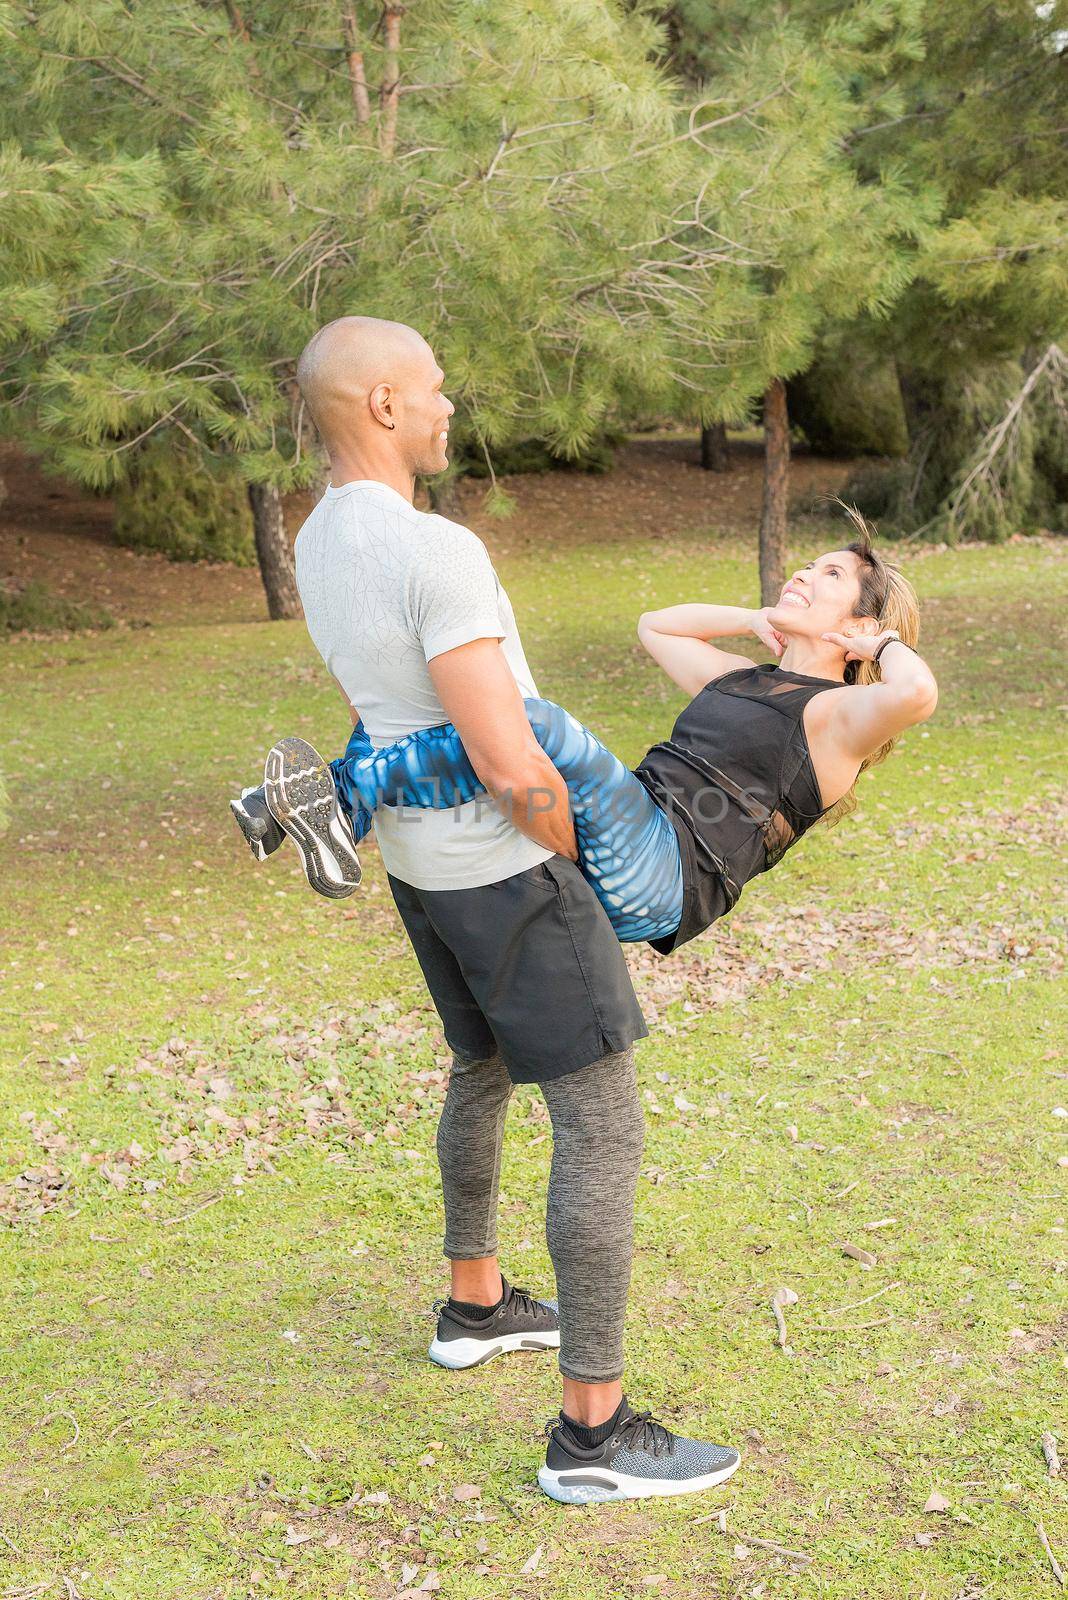 Fitness couple doing abdominal excersise while he holding she for her legs. Couple doing exercise outdoors together.